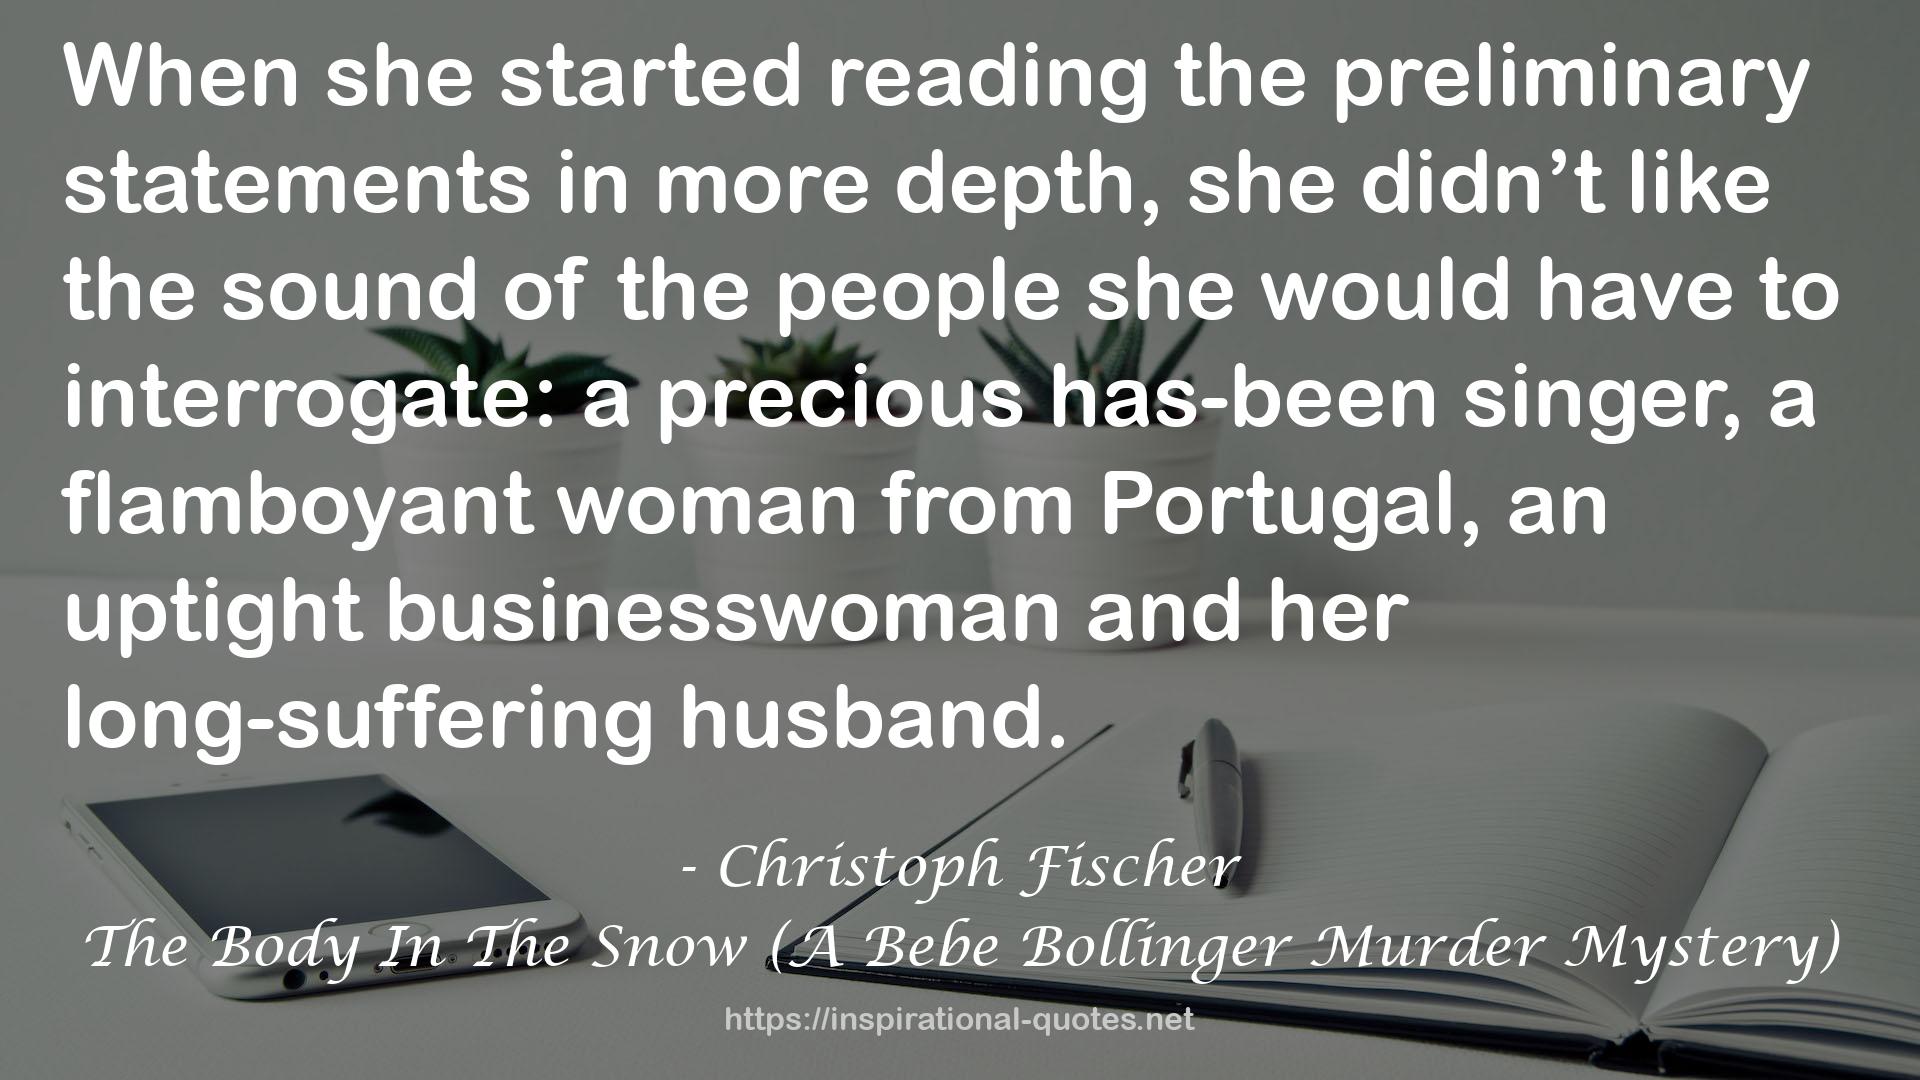 The Body In The Snow (A Bebe Bollinger Murder Mystery) QUOTES